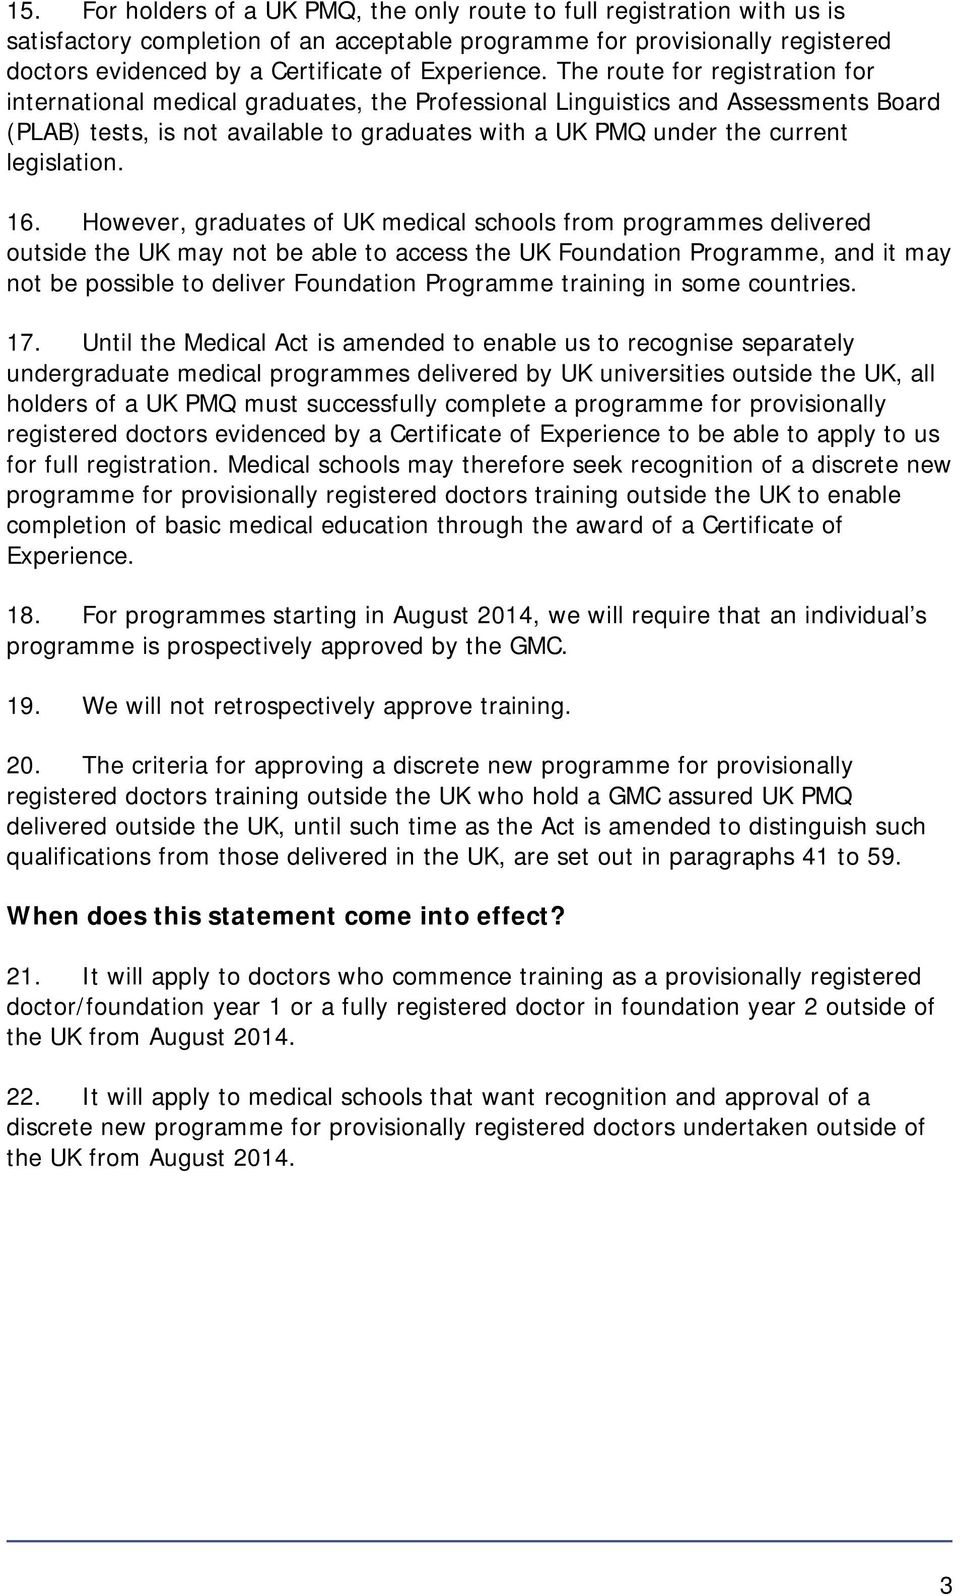 The route for registration for international medical graduates, the Professional Linguistics and Assessments Board (PLAB) tests, is not available to graduates with a UK PMQ under the current